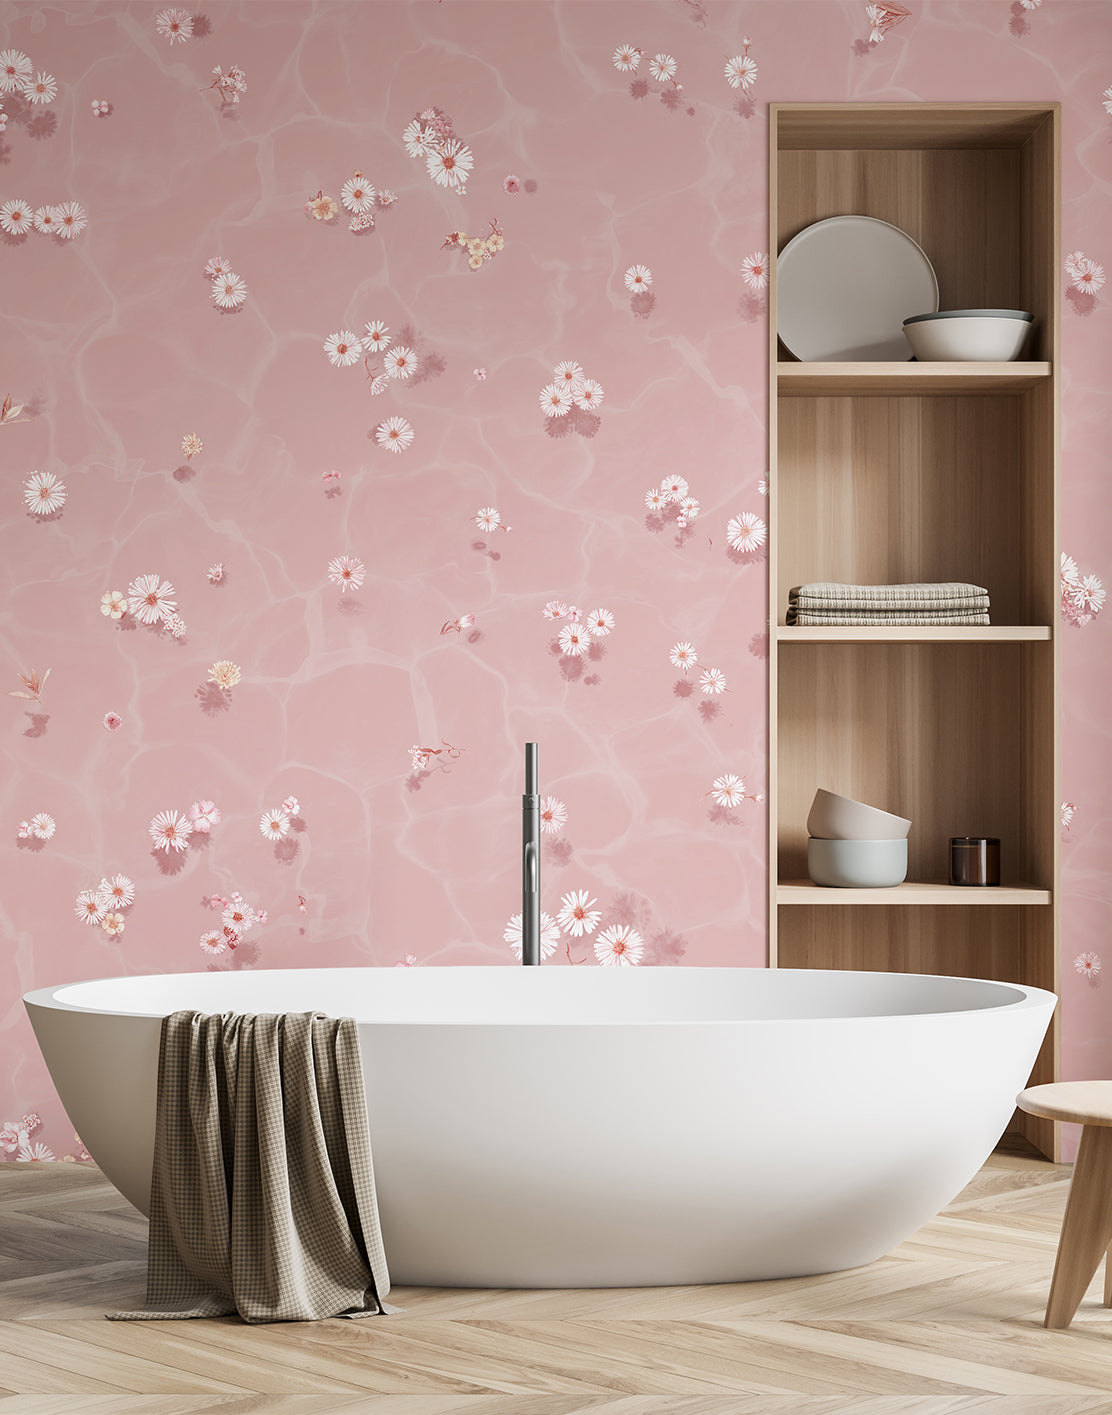 New Collection: Floral Bath